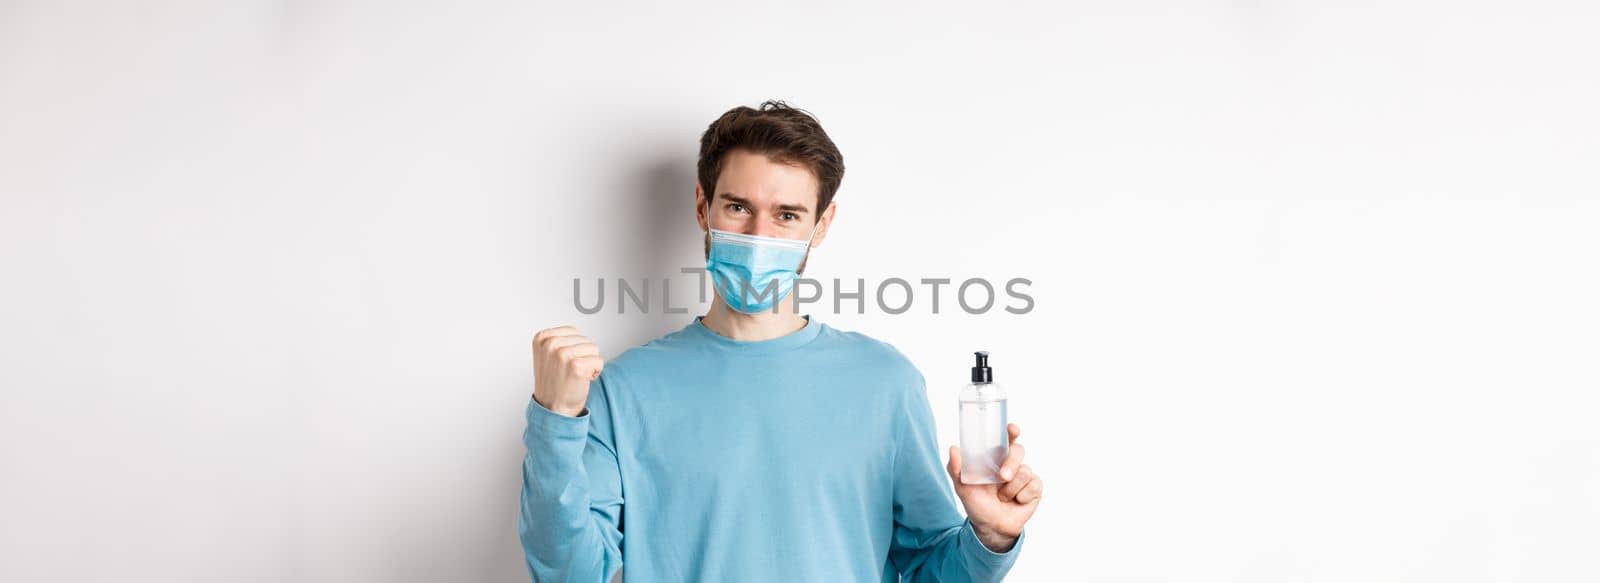 Covid-19, health and quarantine concept. Cheerful man in face mask celebrating, showing fist pump and bottle with hand sanitizer, fighting germs, white background.